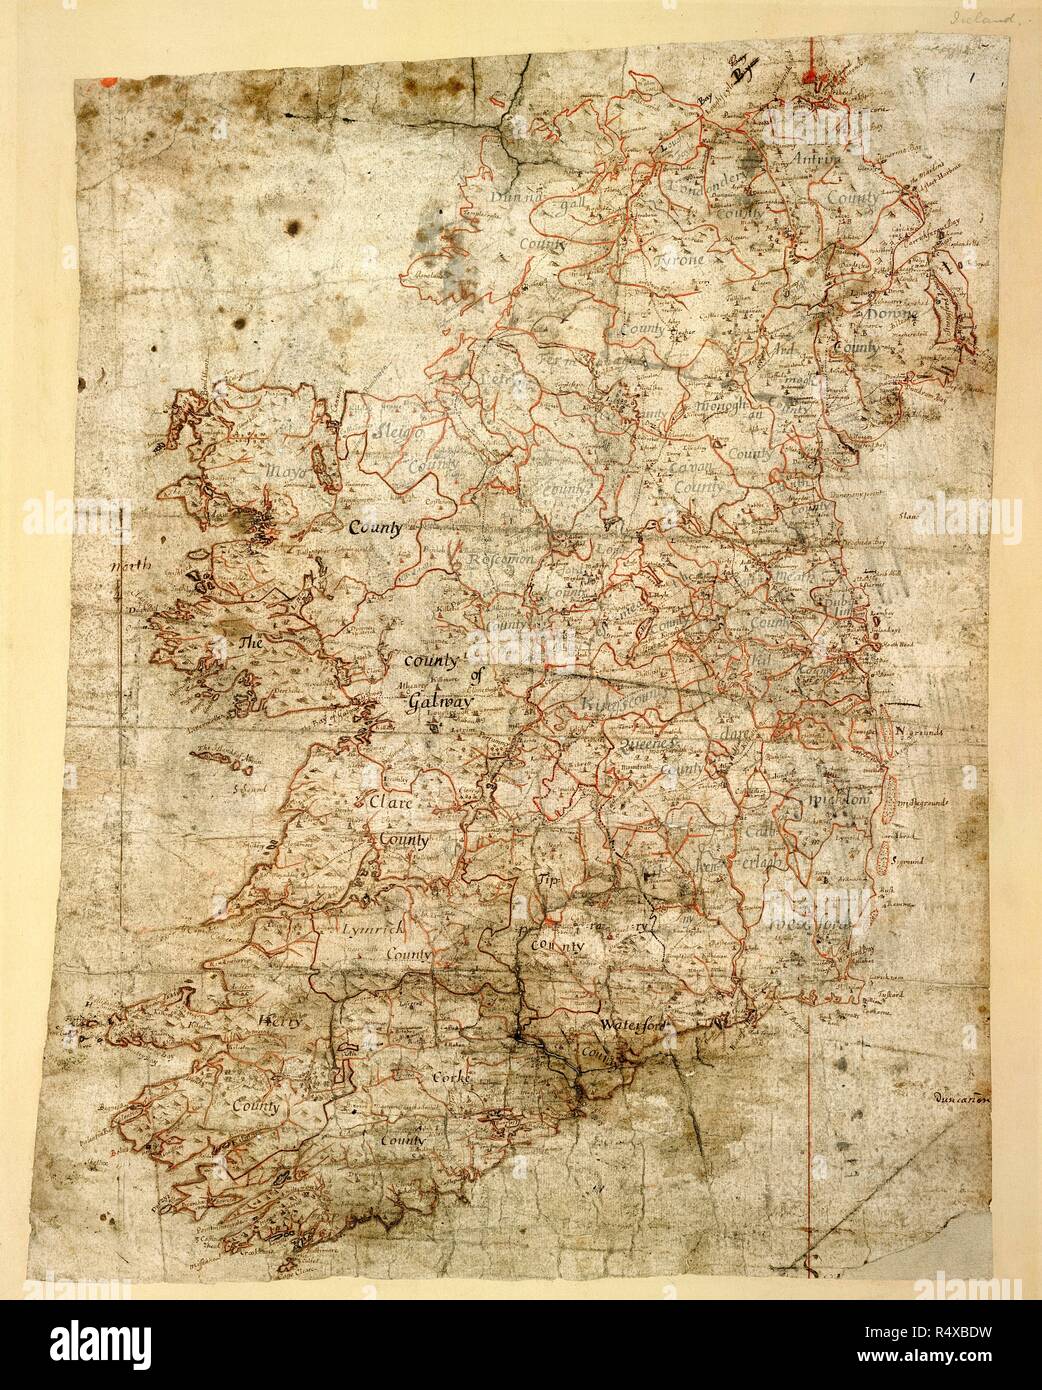 Map of Ireland. Petty Papers, Vol. XVI. Ireland [Dublin]; between 1655 and  1665. {Whole map]. Map of Ireland, produced for Sir William Petty's  Hiberniae Delineatio, published in 1684, the first printed atlas